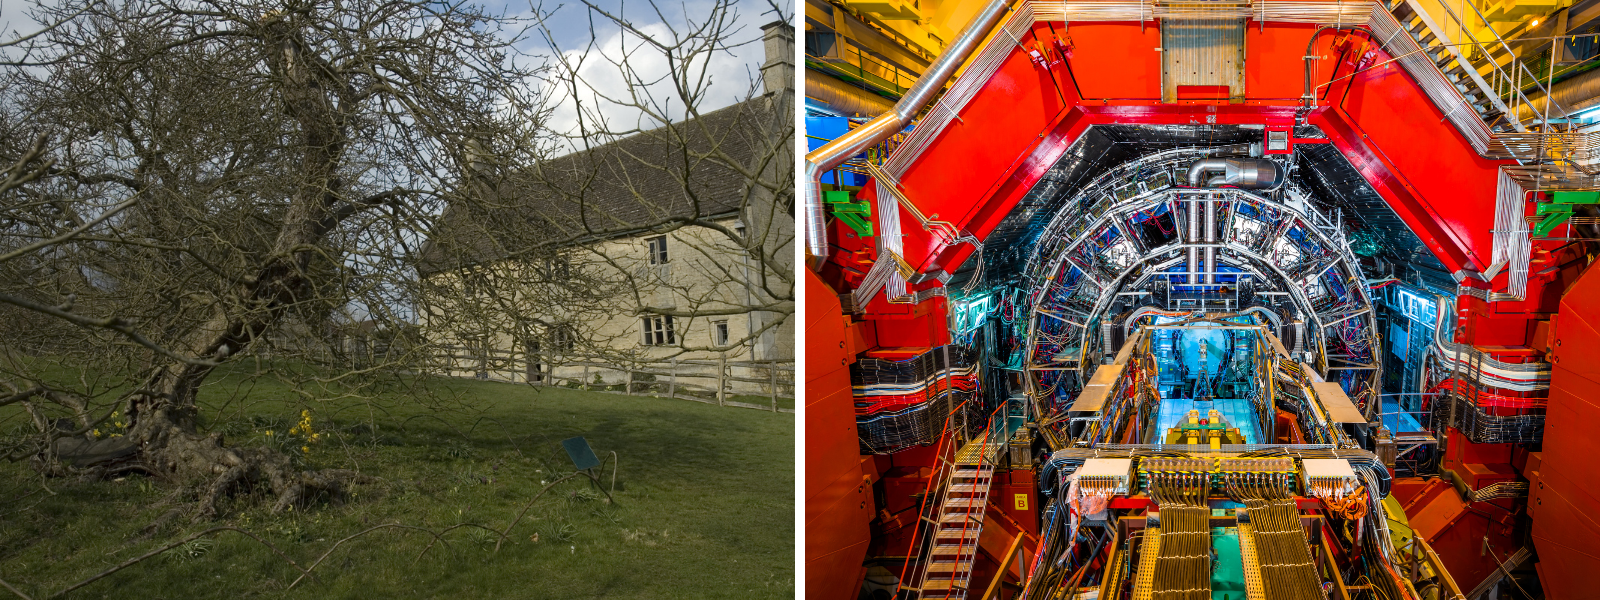 photos of Newton's apple tree and the CERN particle accelerator